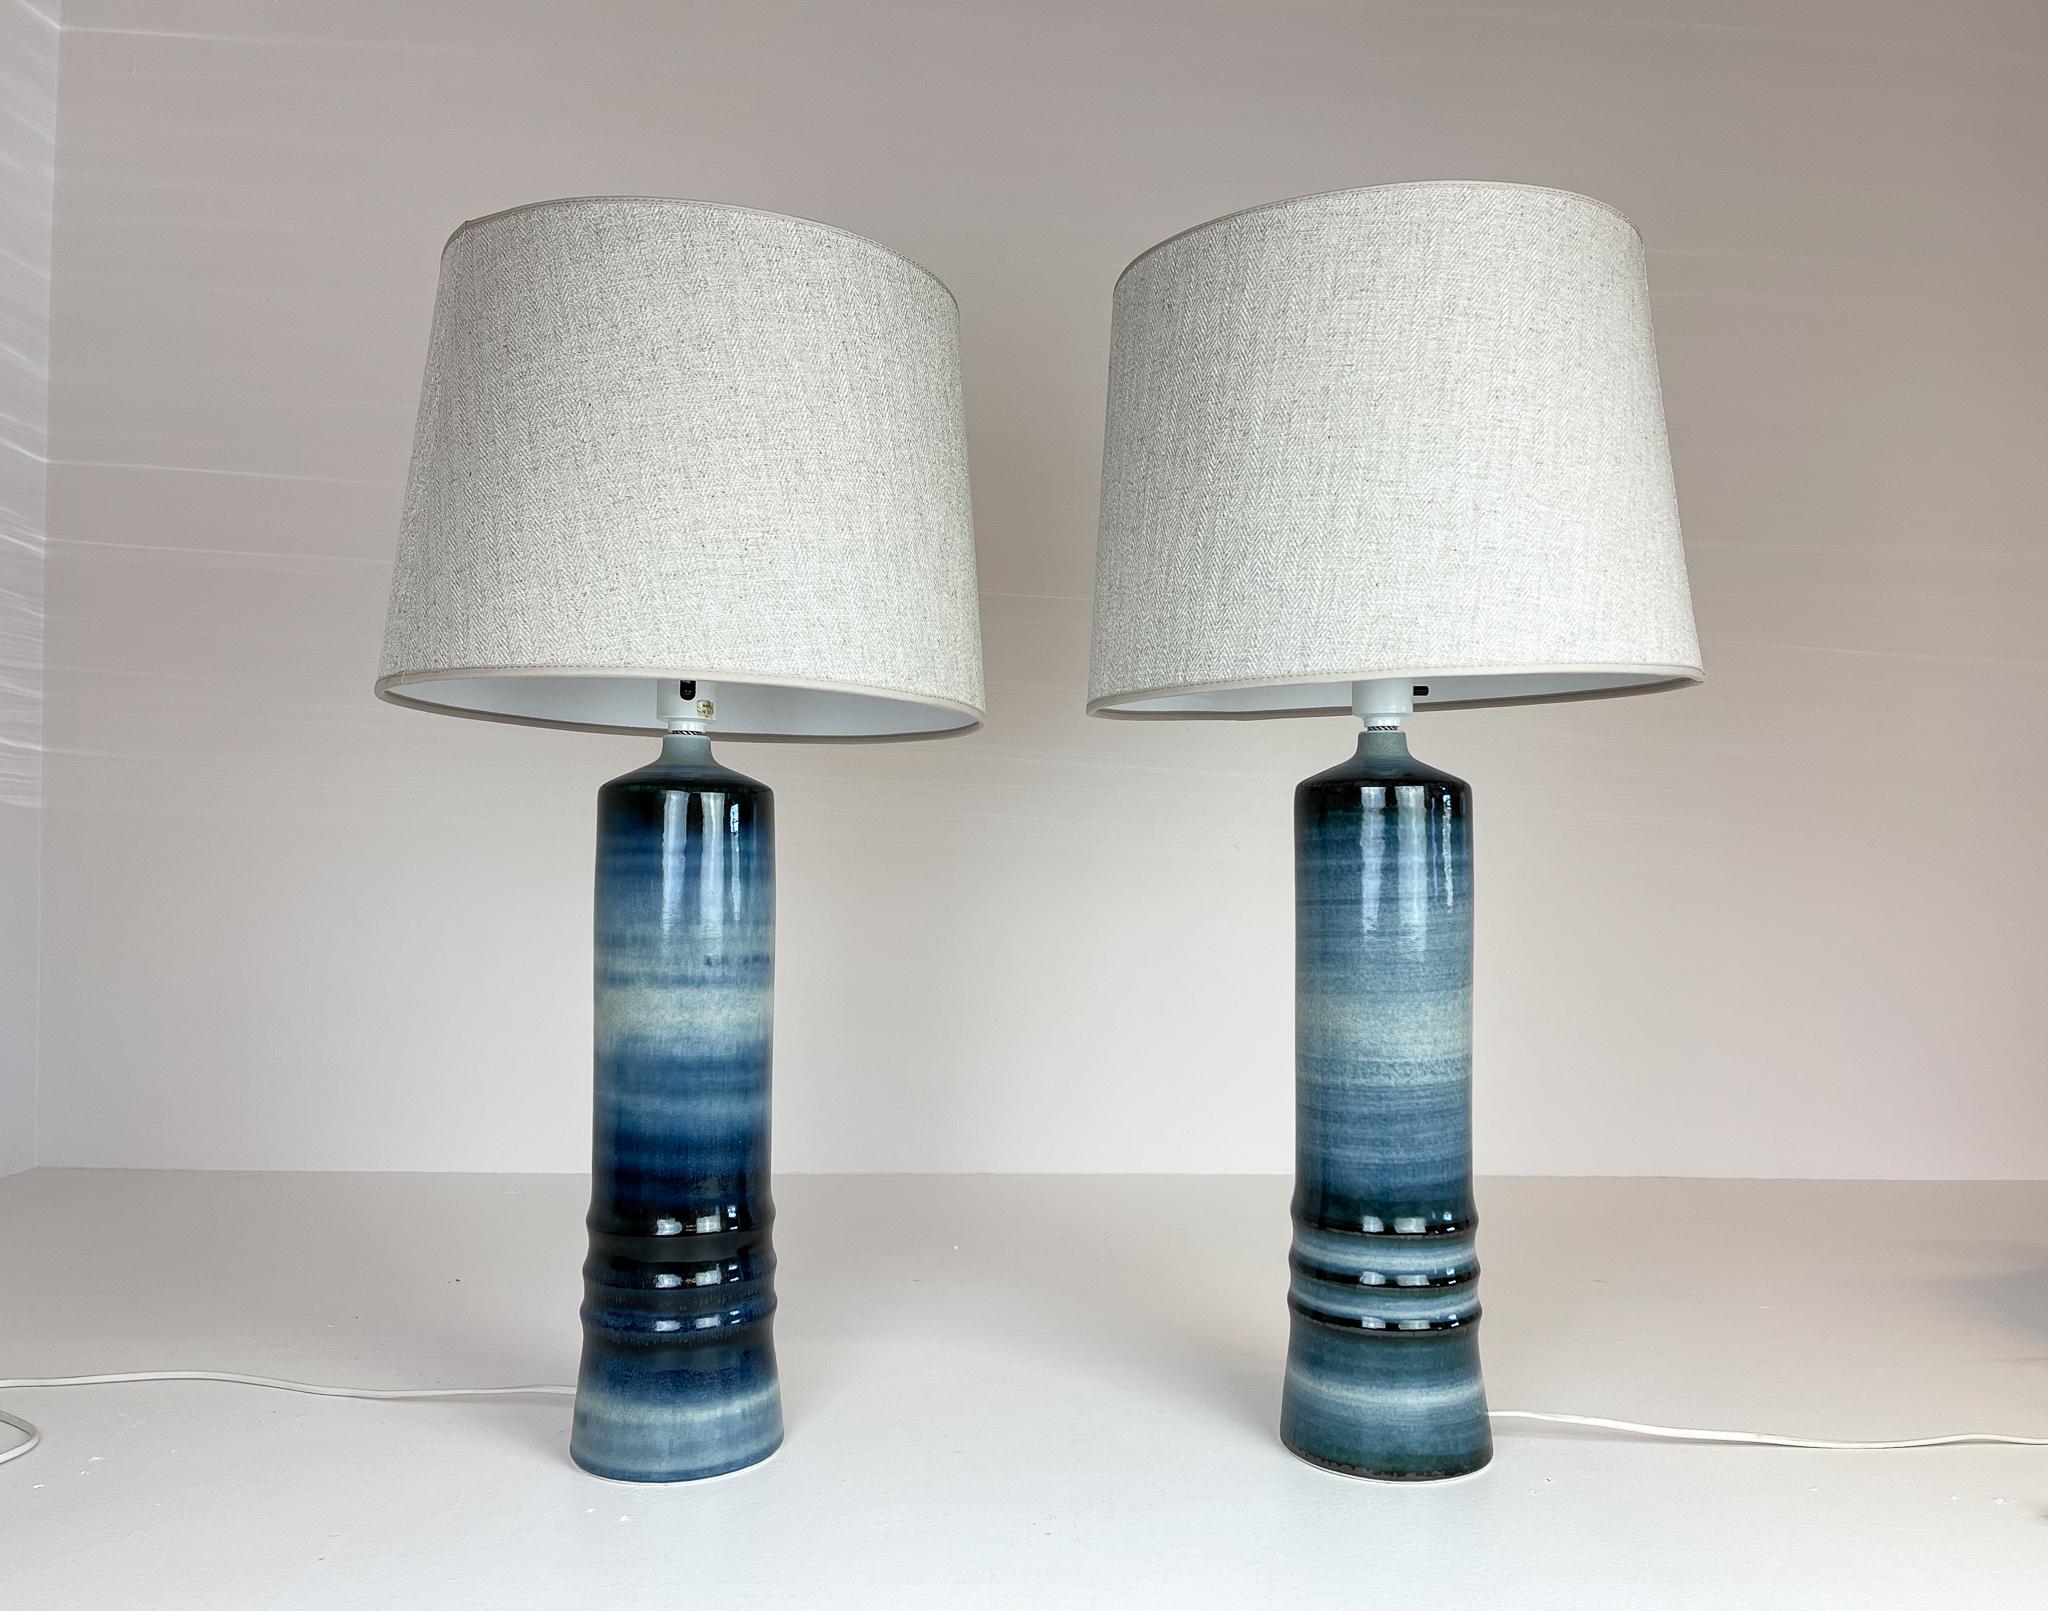 A pair of large, glazed stoneware table lamps by Olle Alberius for Rörstrand, Sweden, 1970s.
Signed on the base. The blue glaze is wonderful and gives a great shine when lit. One of the lamps has the original label. It’s rare to find a pair of